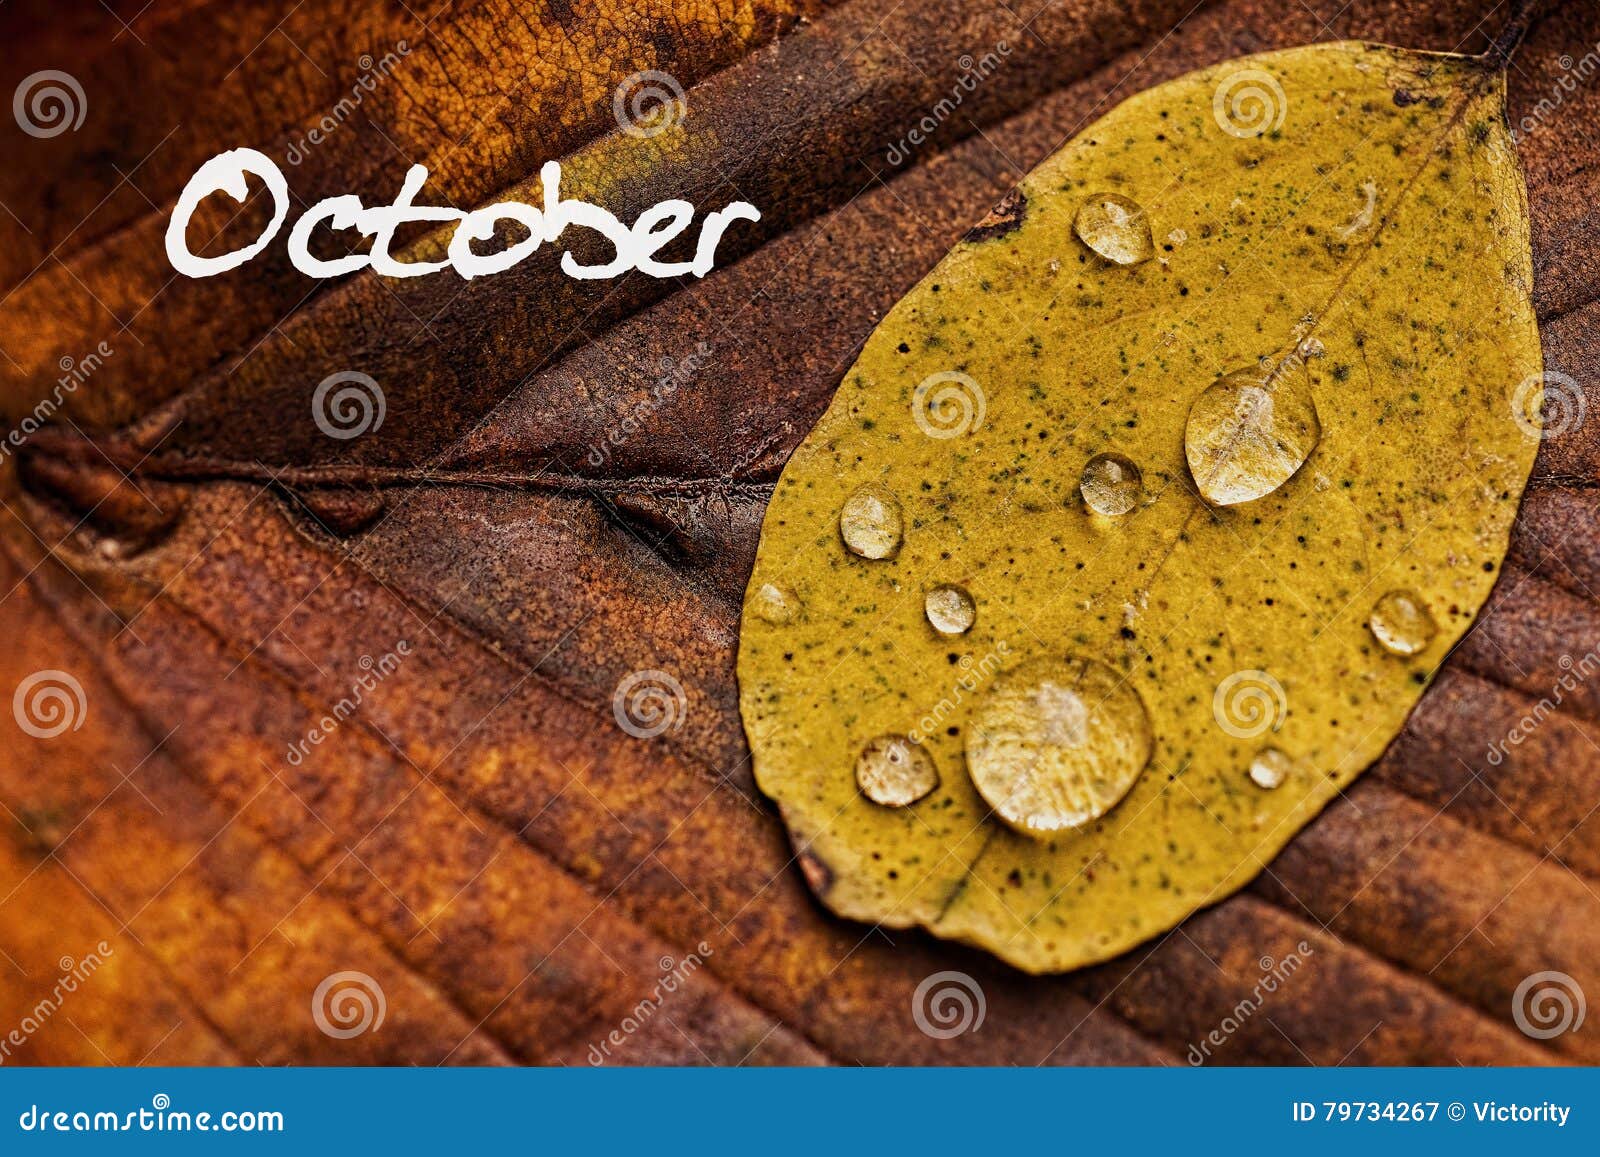 autumn leaves with rain droplets. october concept wallpaper.